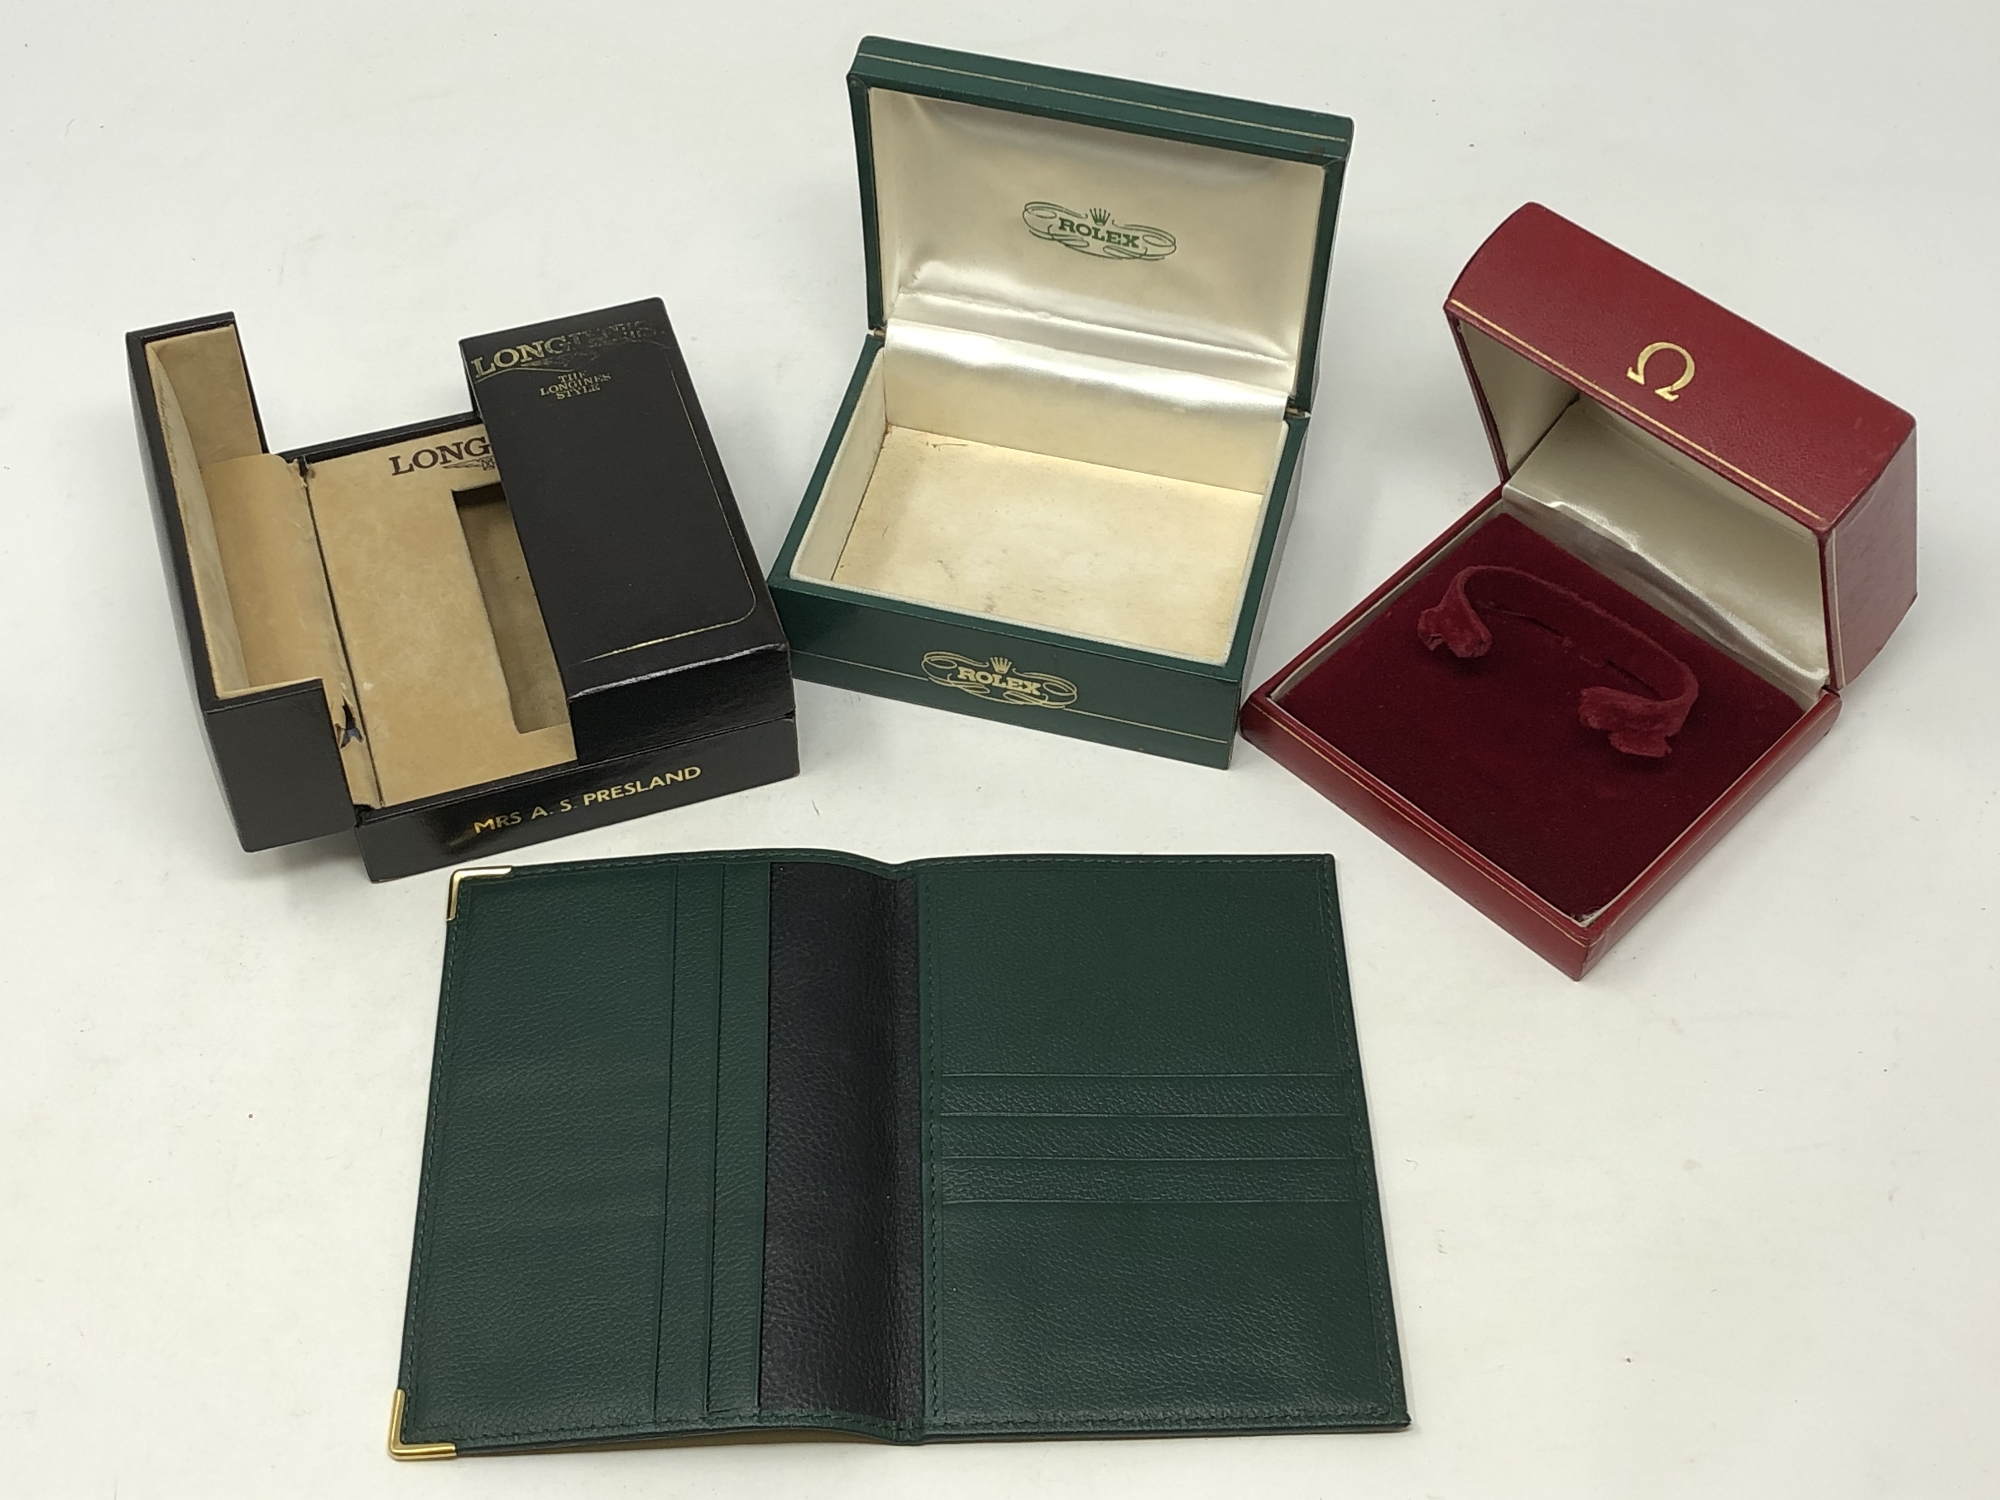 Three vintage wristwatch boxes; Rolex, Omega and Longines, plus a Rolex green leather wallet.